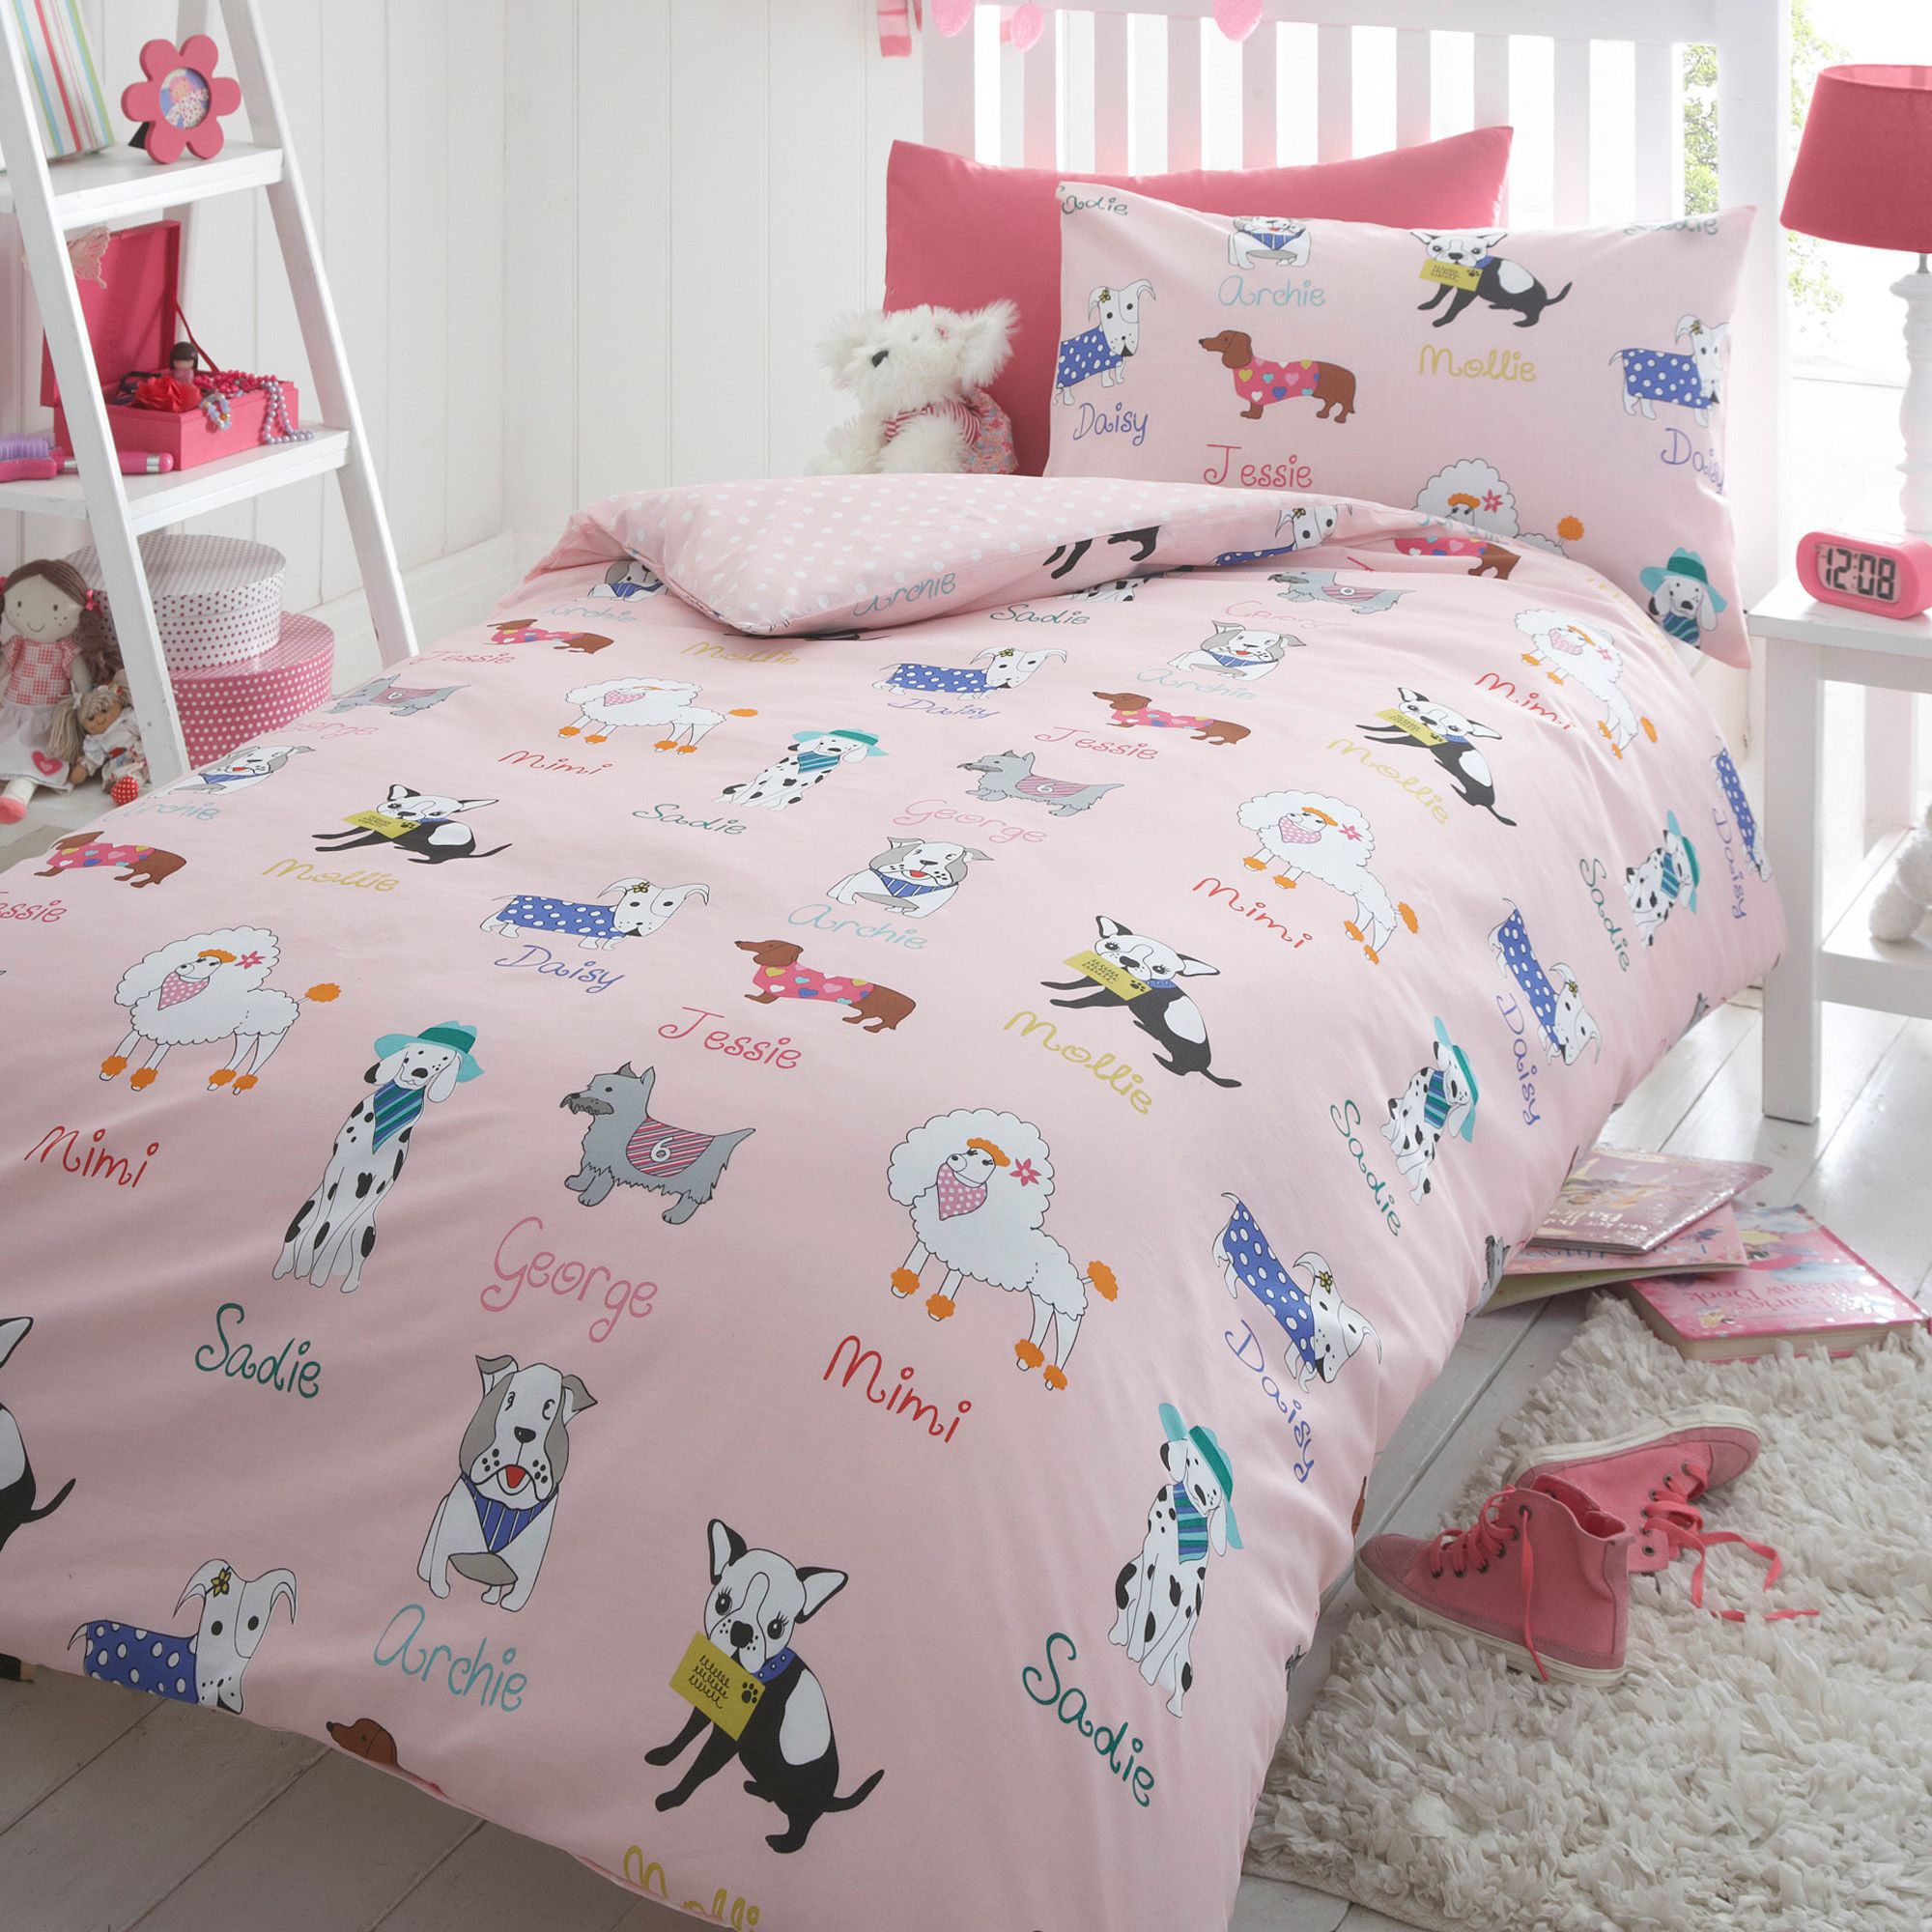 85 Recomended Dog themed bedroom ideas Trend in 2021